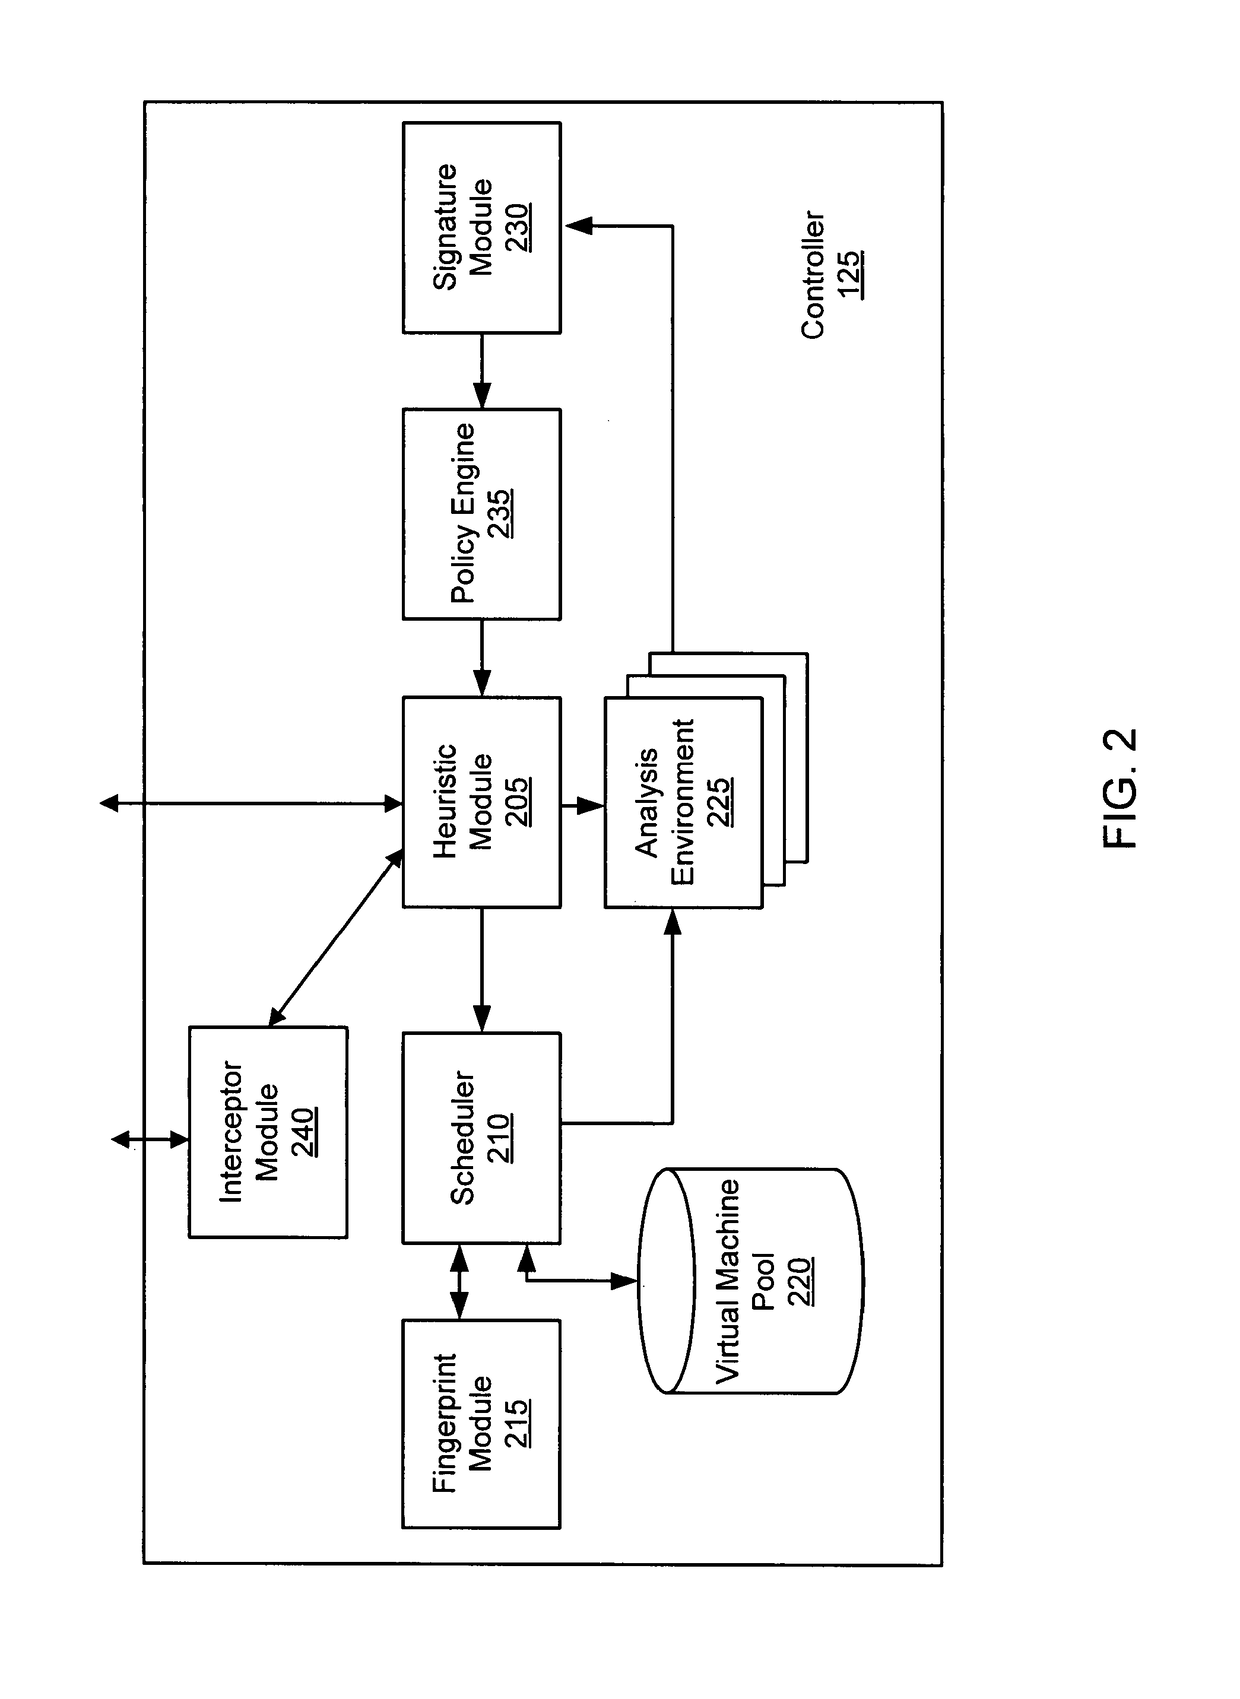 Systems and methods for malware attack prevention by intercepting flows of information